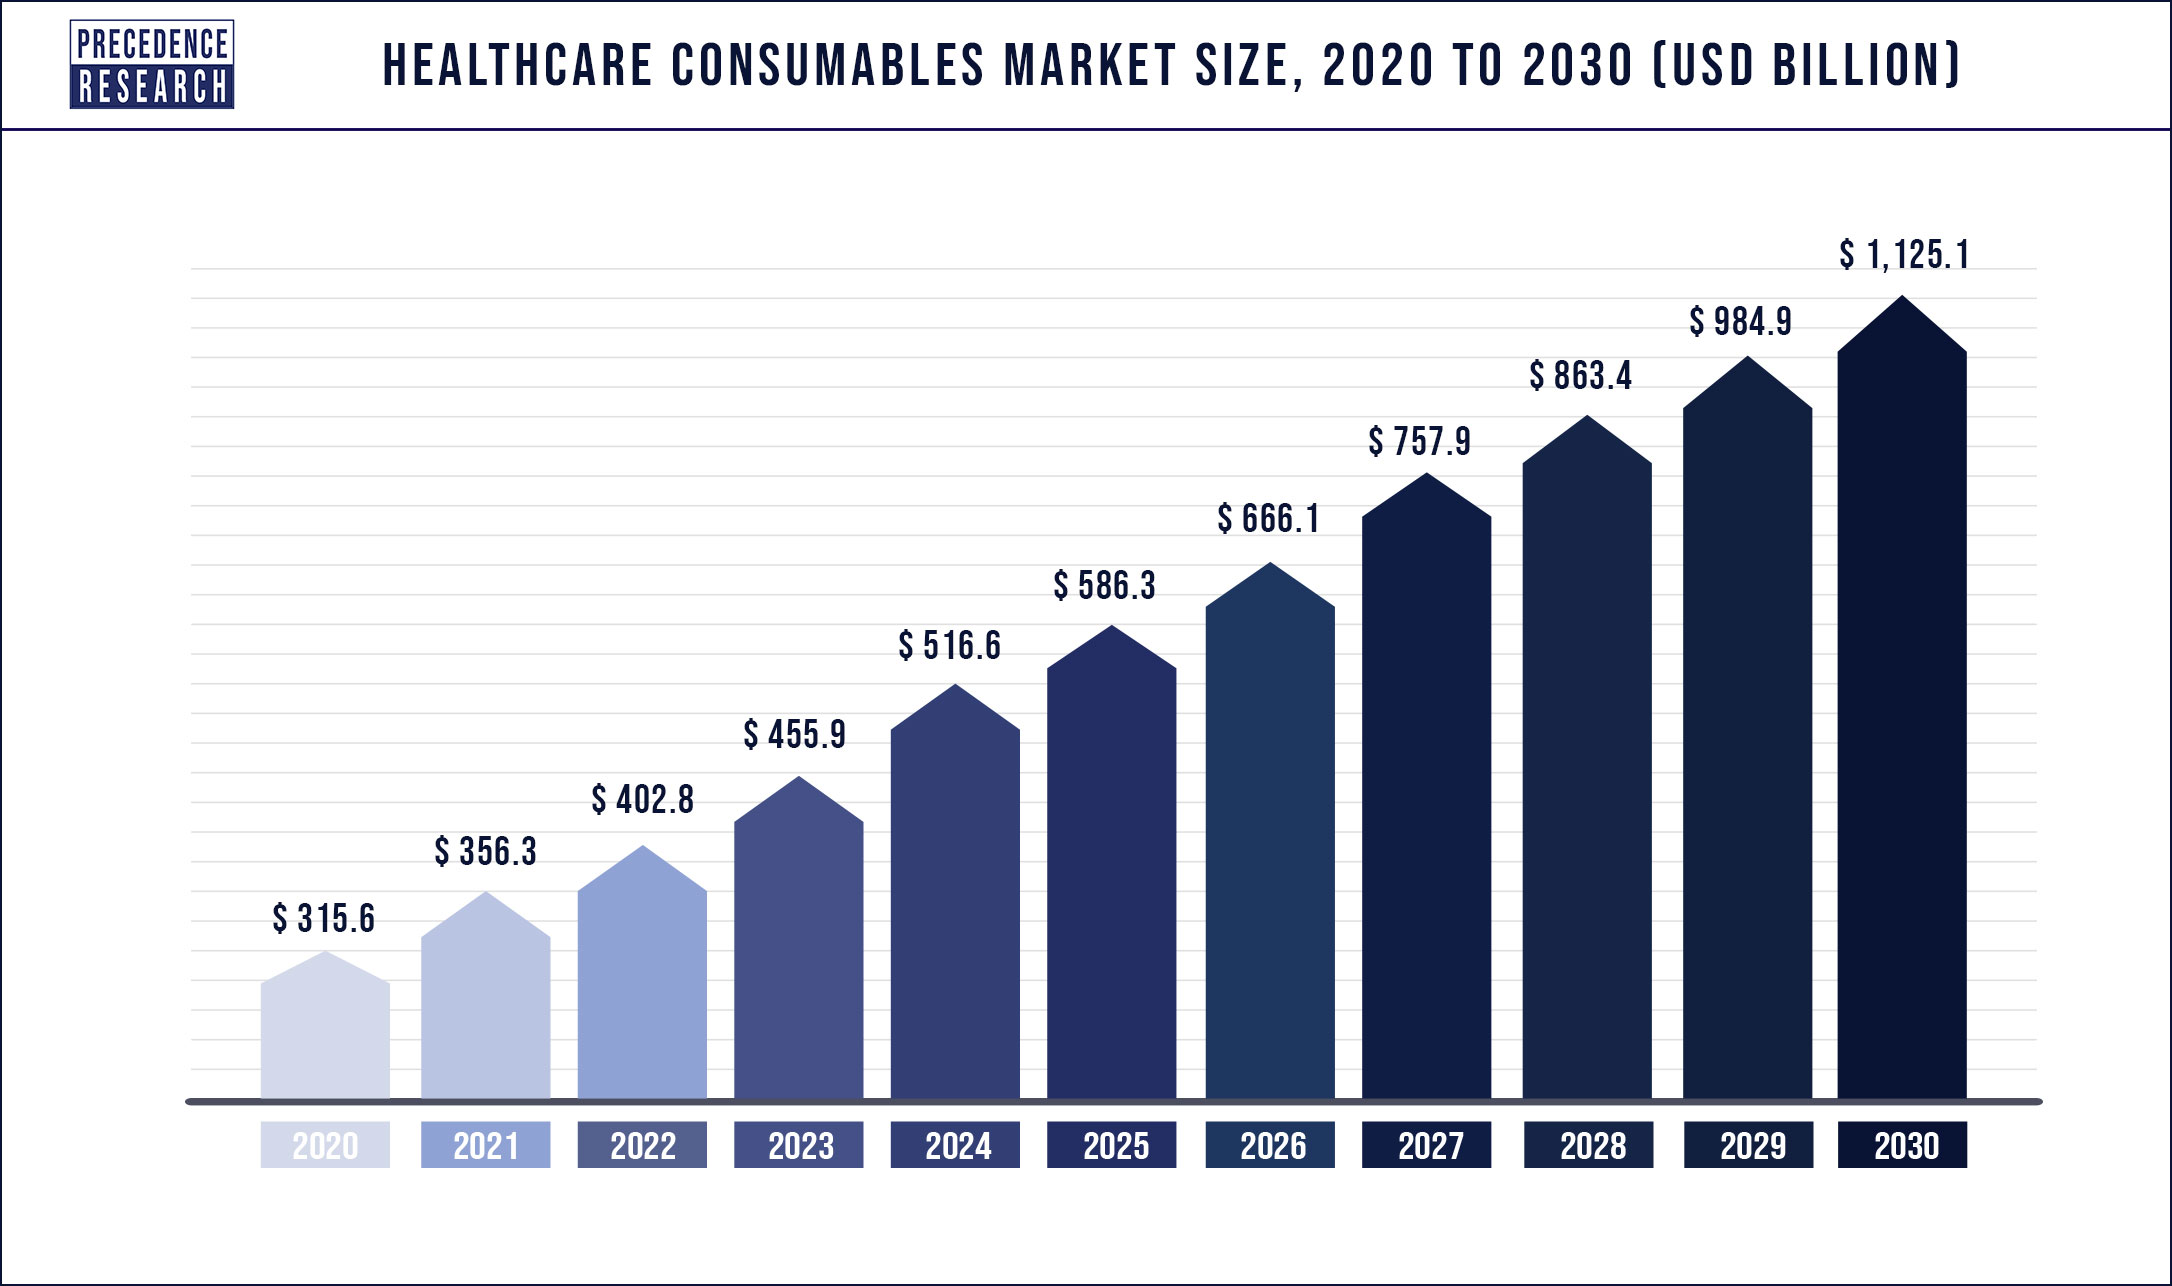 Healthcare Consumables